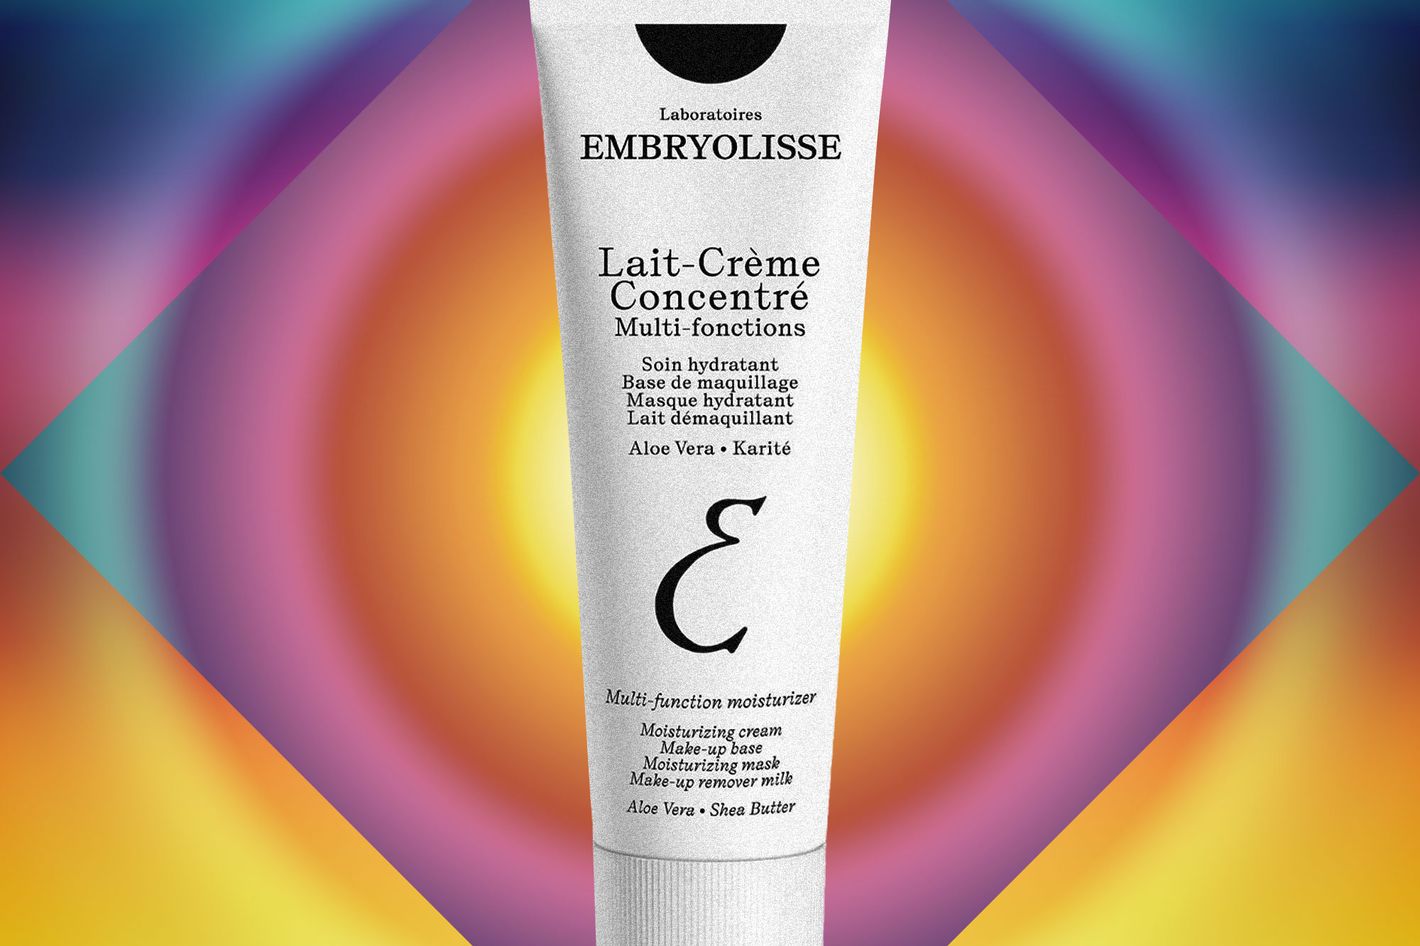 I Want to Buy Embryolisse in the U.S. How Do I Avoid Fakes?